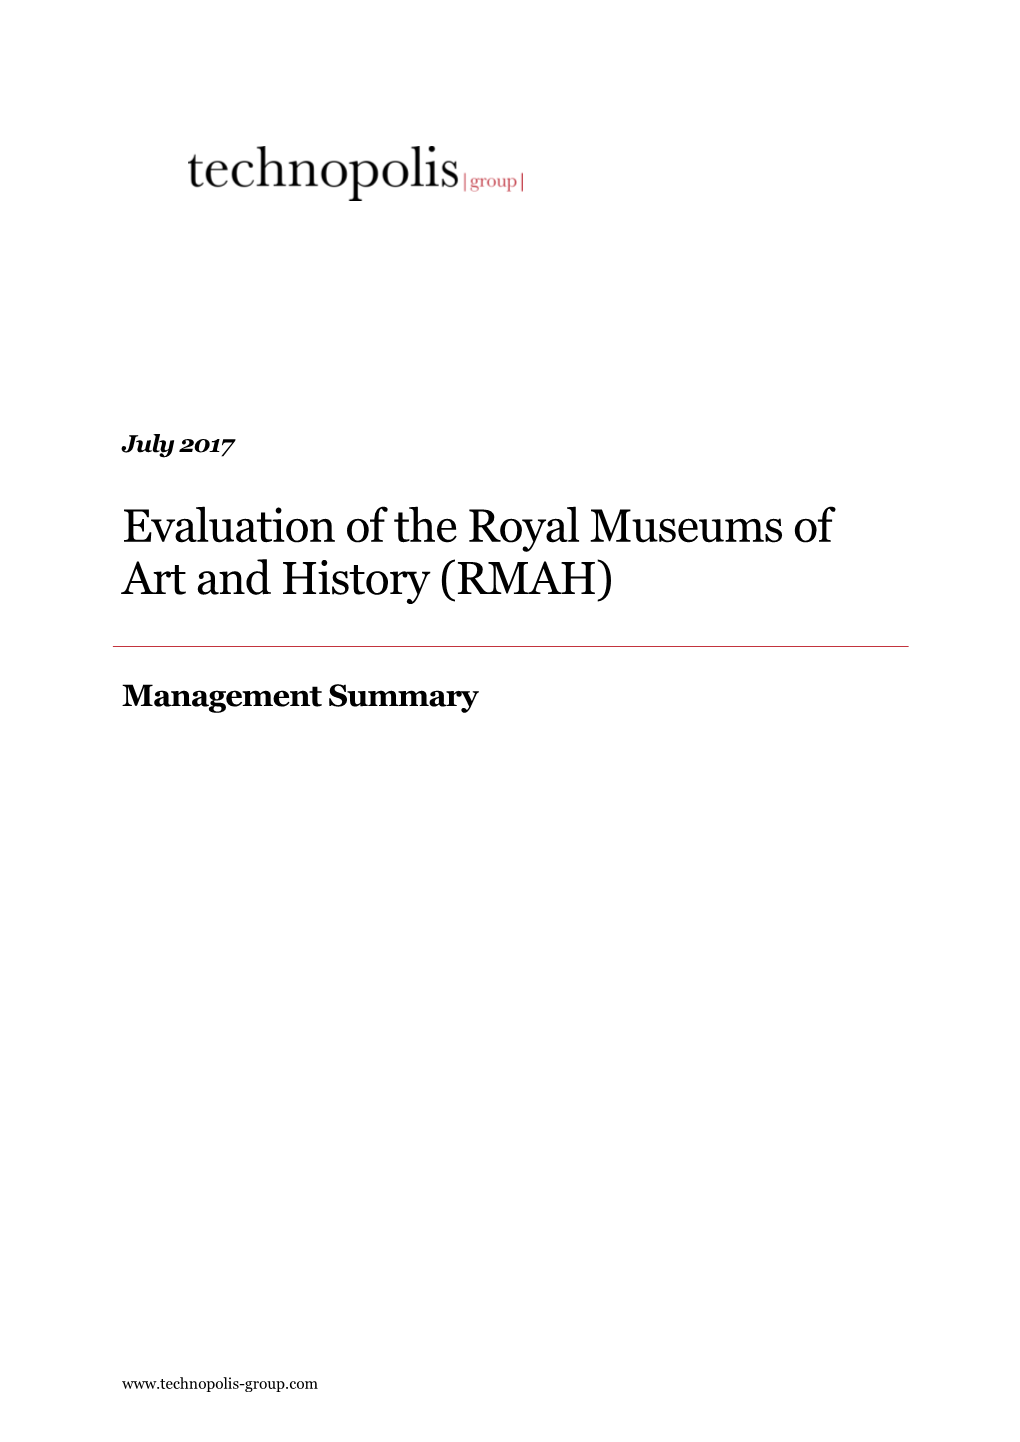 Evaluation of the Royal Museums of Art and History (RMAH)